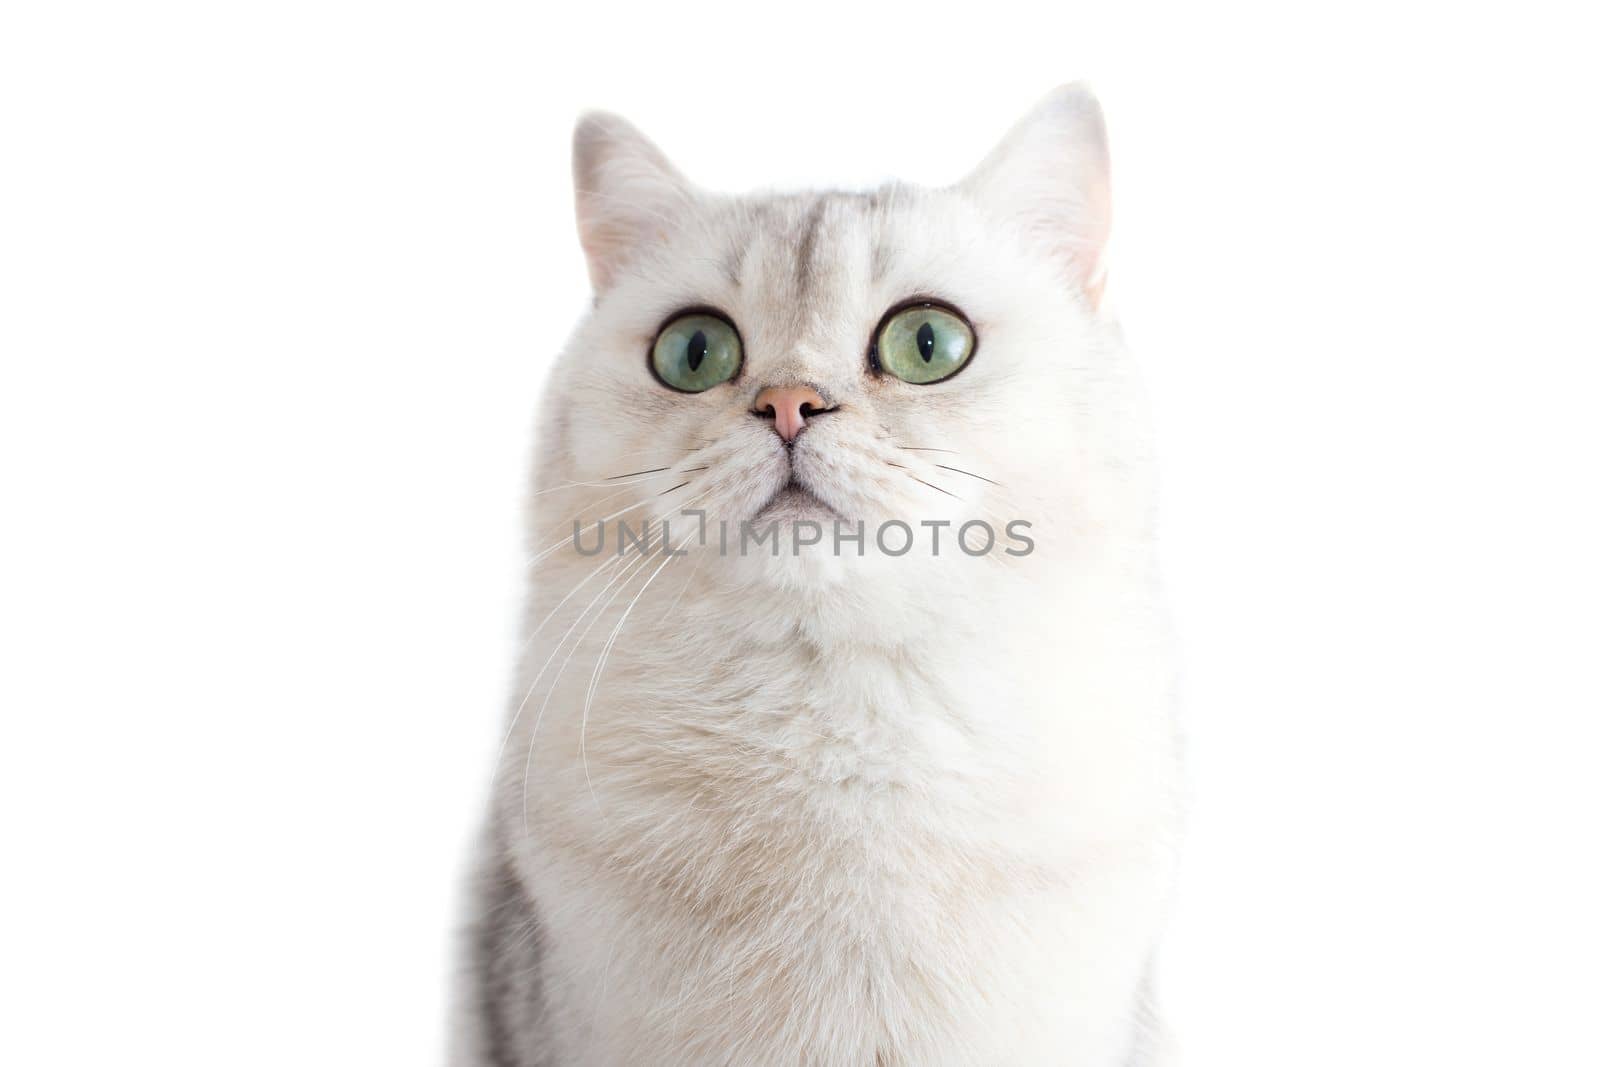 Adorable white British cat with green eyes, on a white background, looks up. Copy space